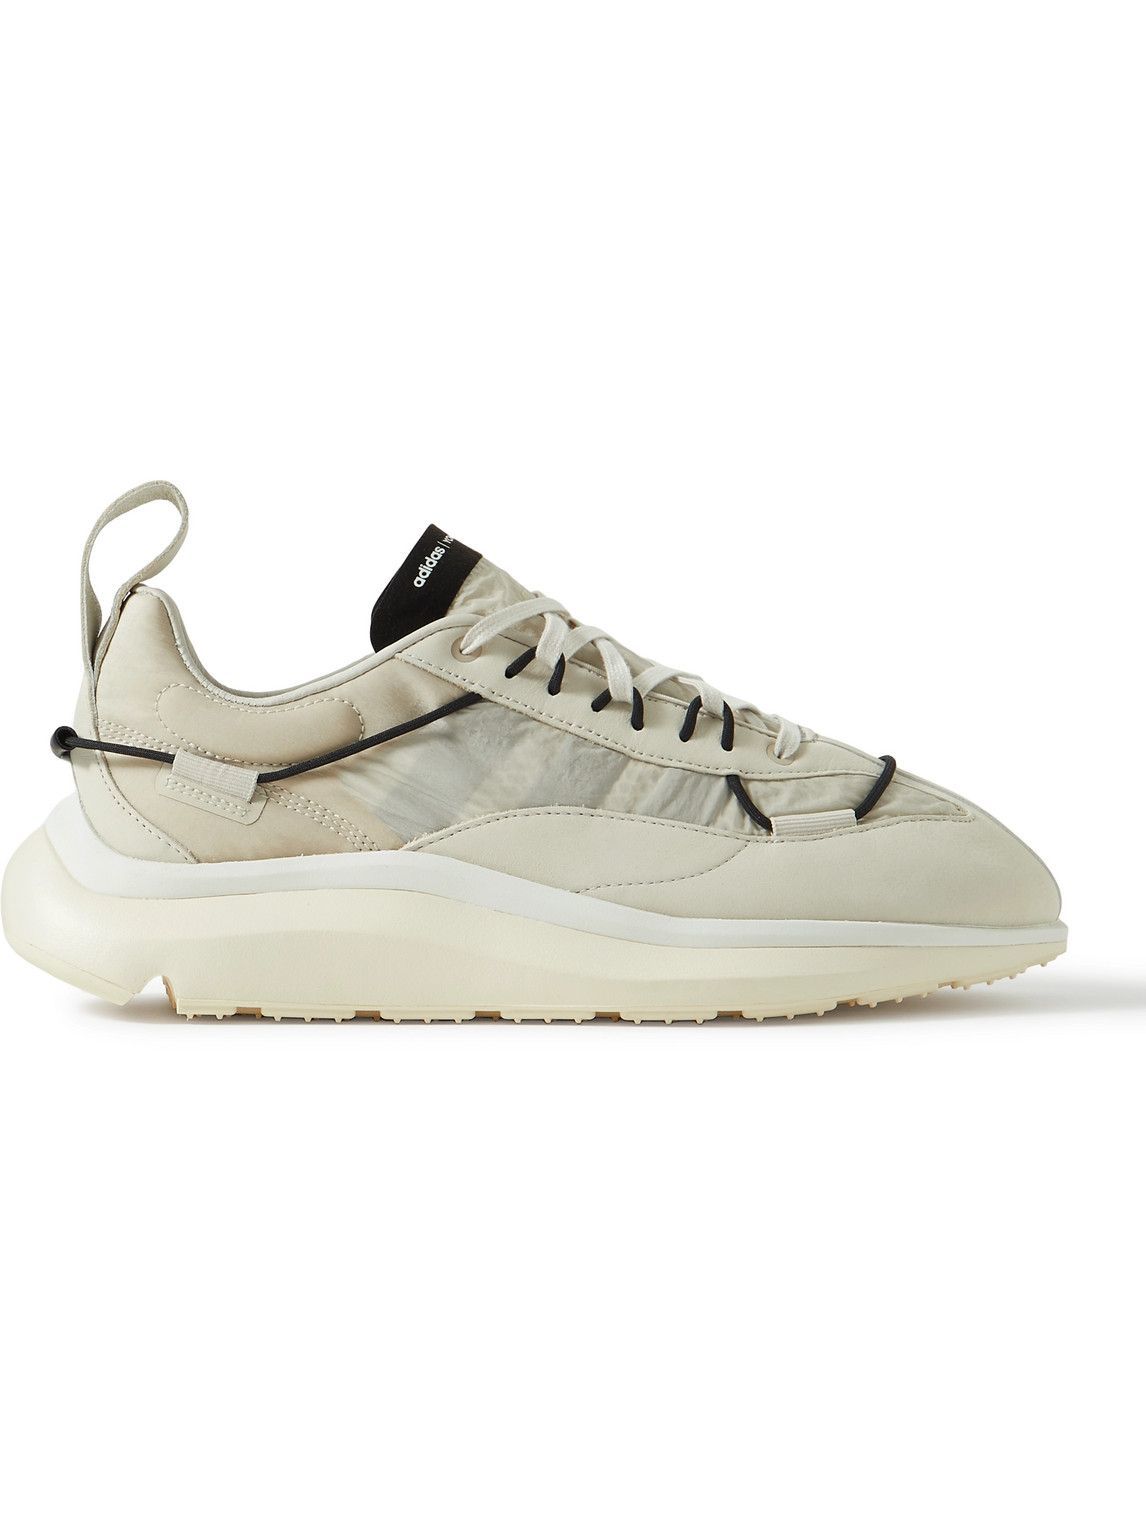 Y-3 - Shiku Run Suede and Leather-Trimmed Shell Sneakers - Neutrals Y-3